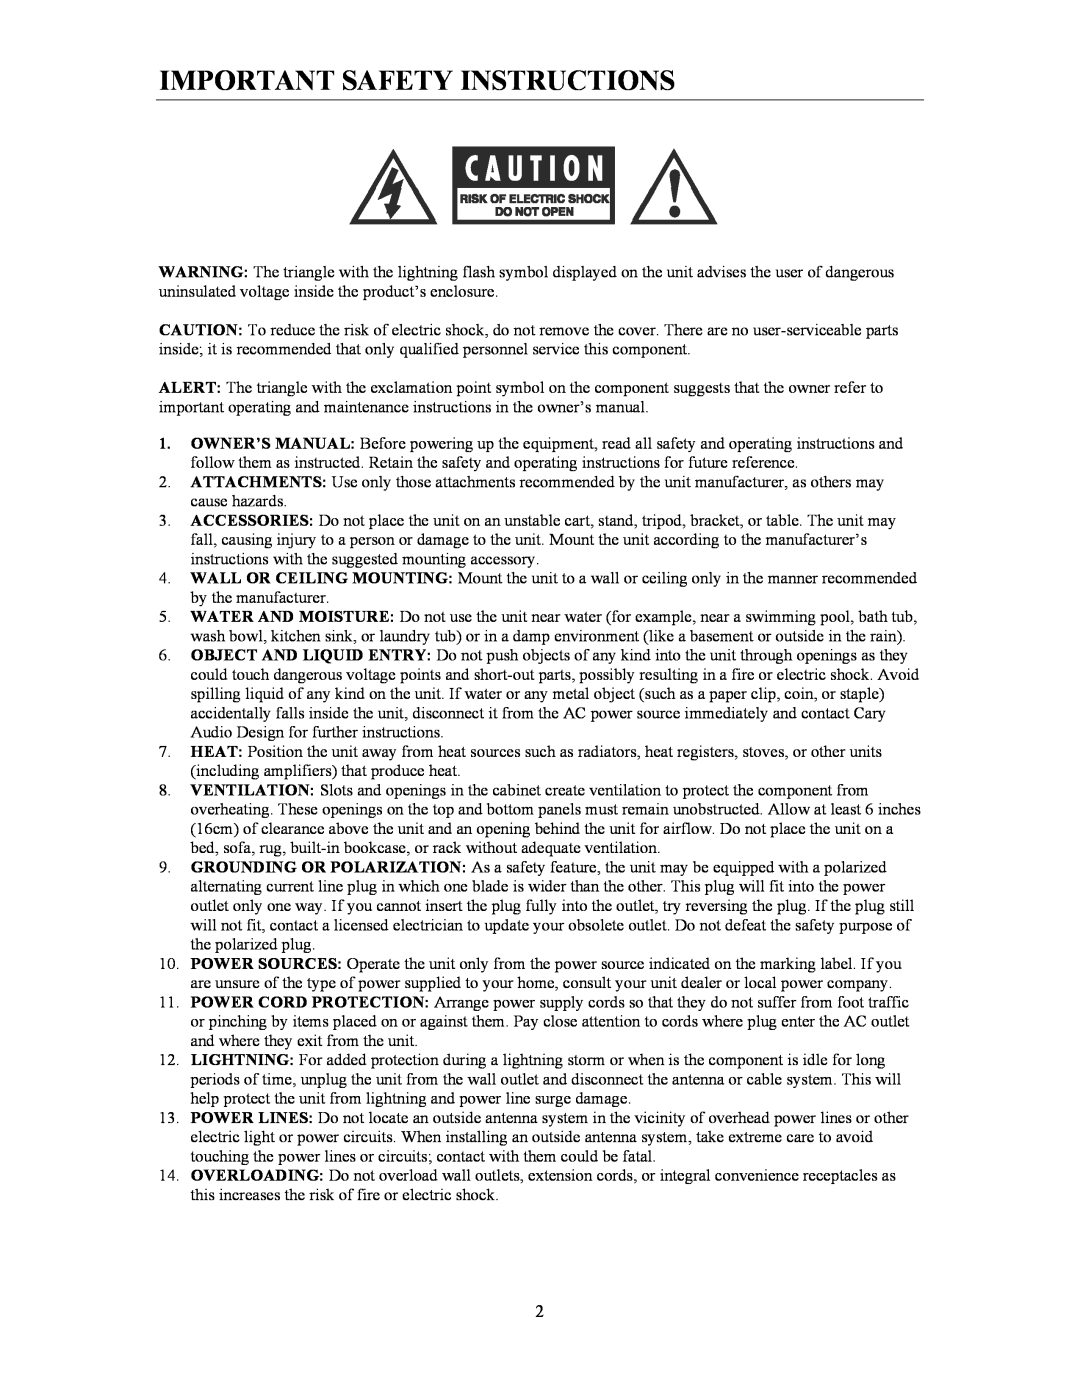 Cary Audio Design CAD 120S MKII owner manual Important Safety Instructions 